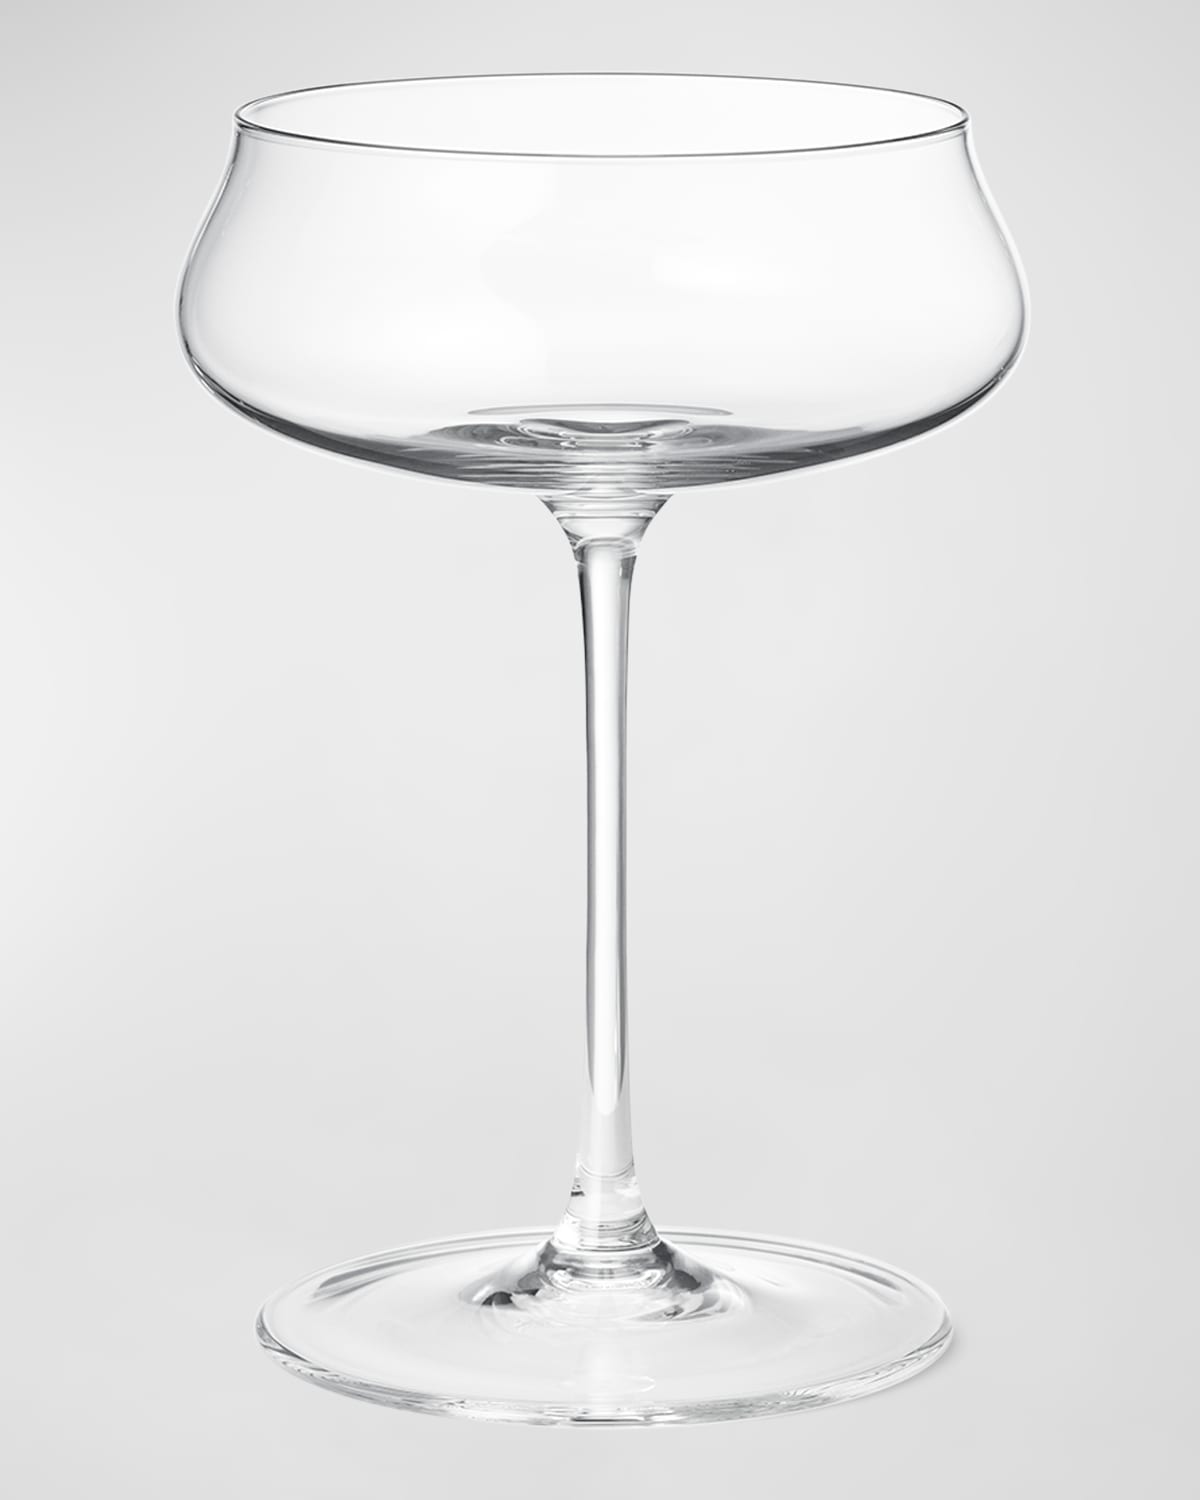 Sky Cocktail Coupe Glasses, Set of 2